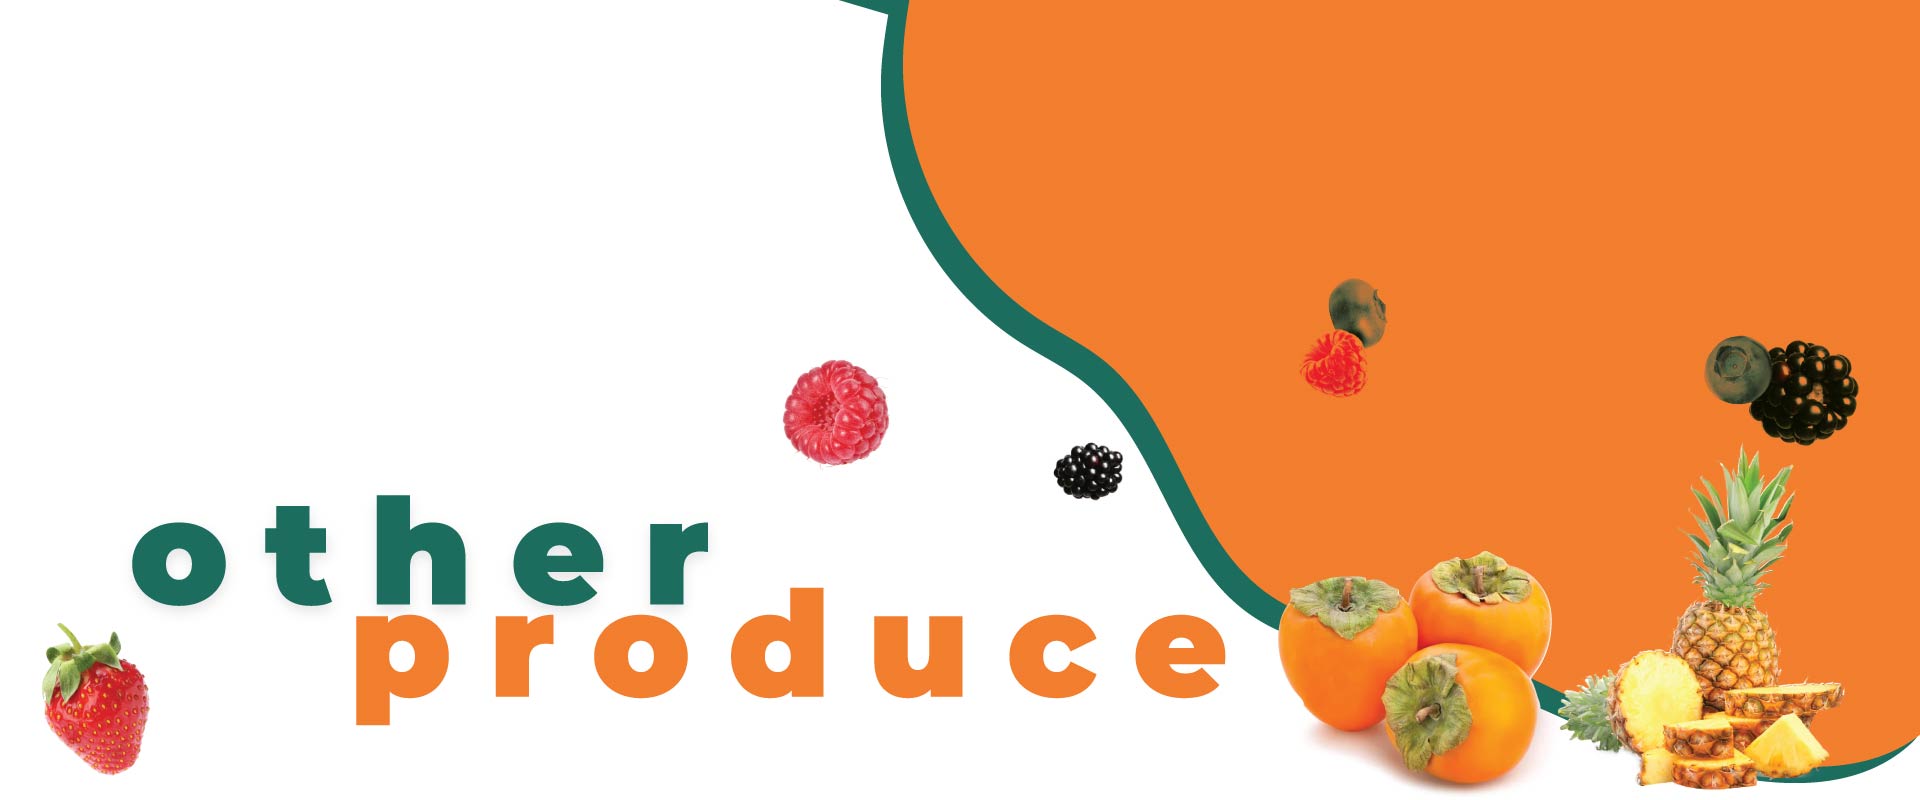 vegetables and fruits in california supplier